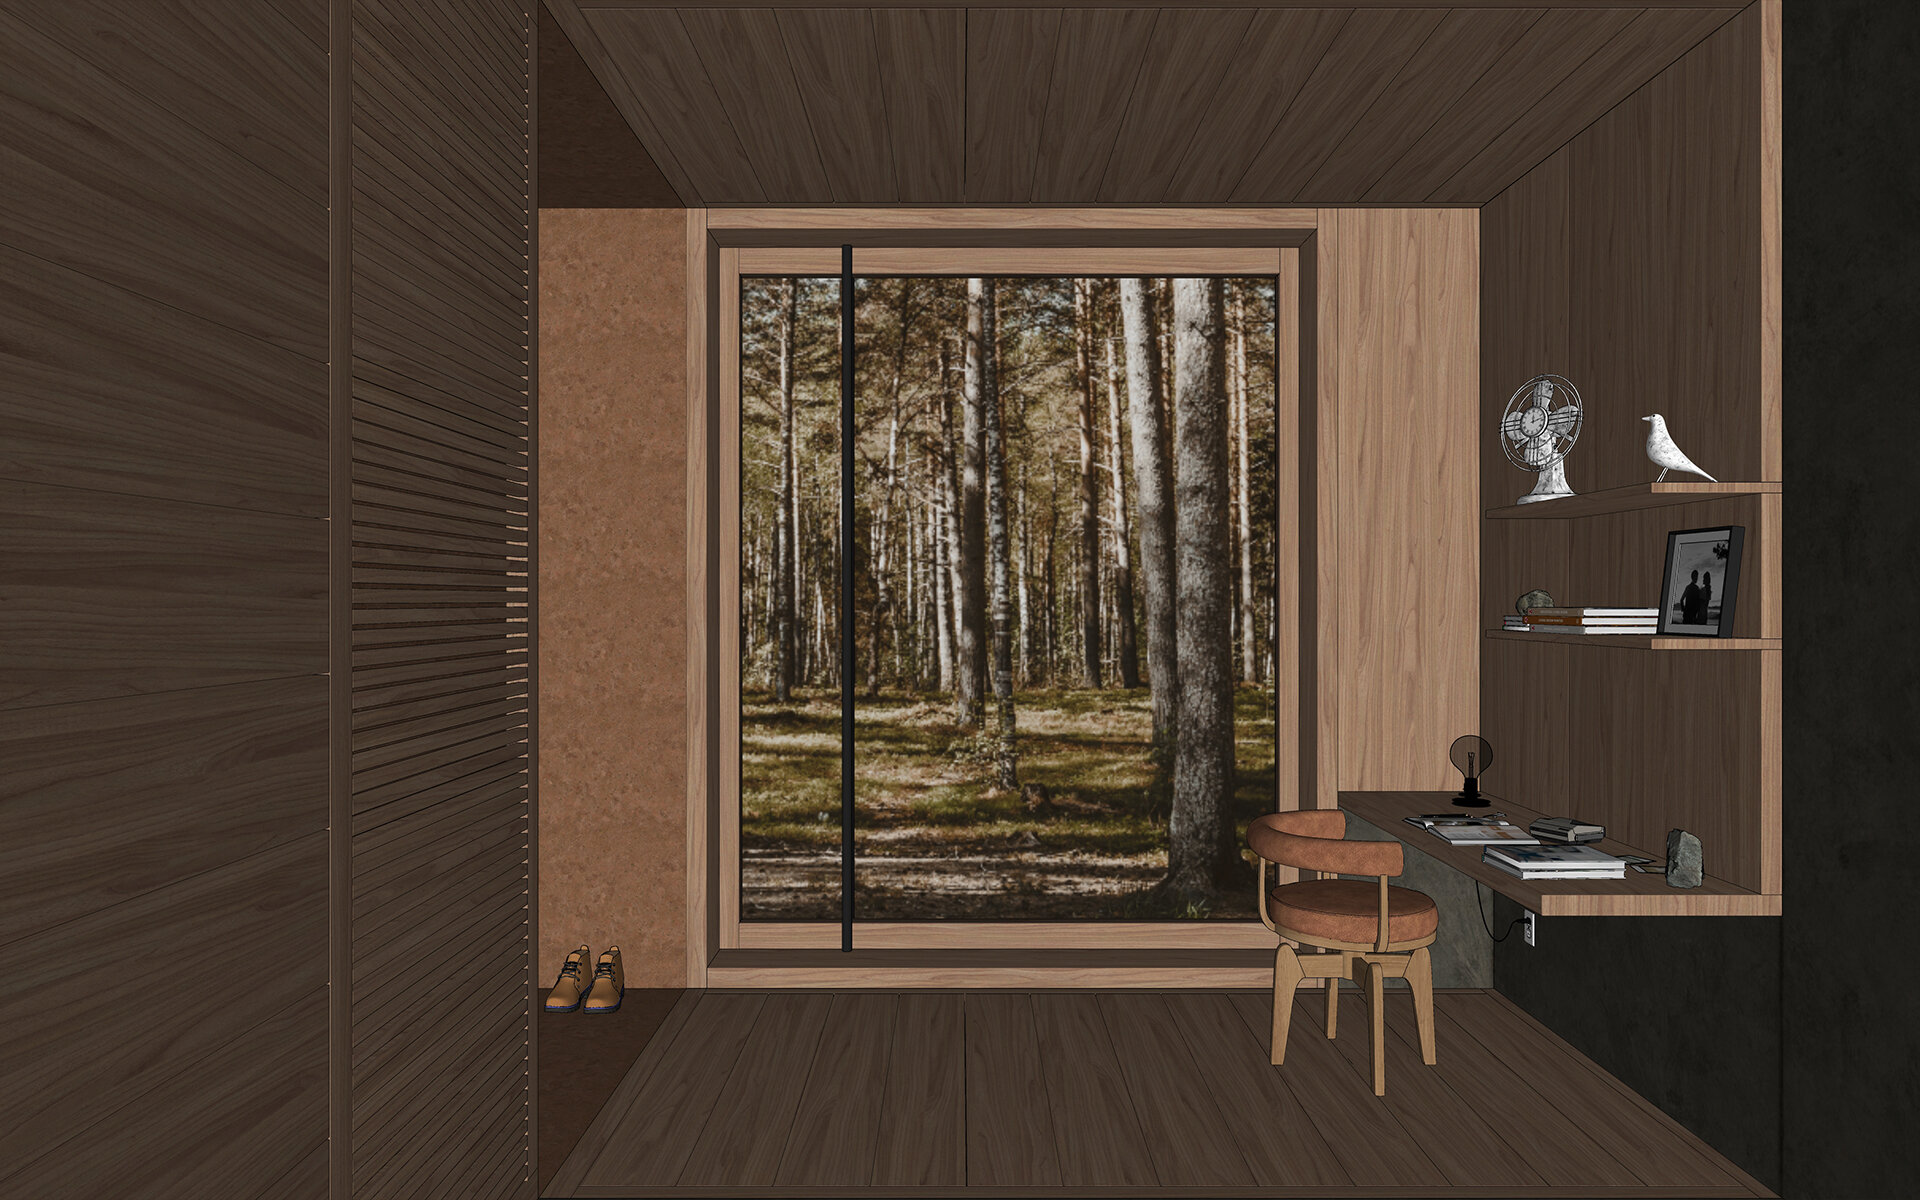 Office in the Forest View 1 Screenshot 2.jpg